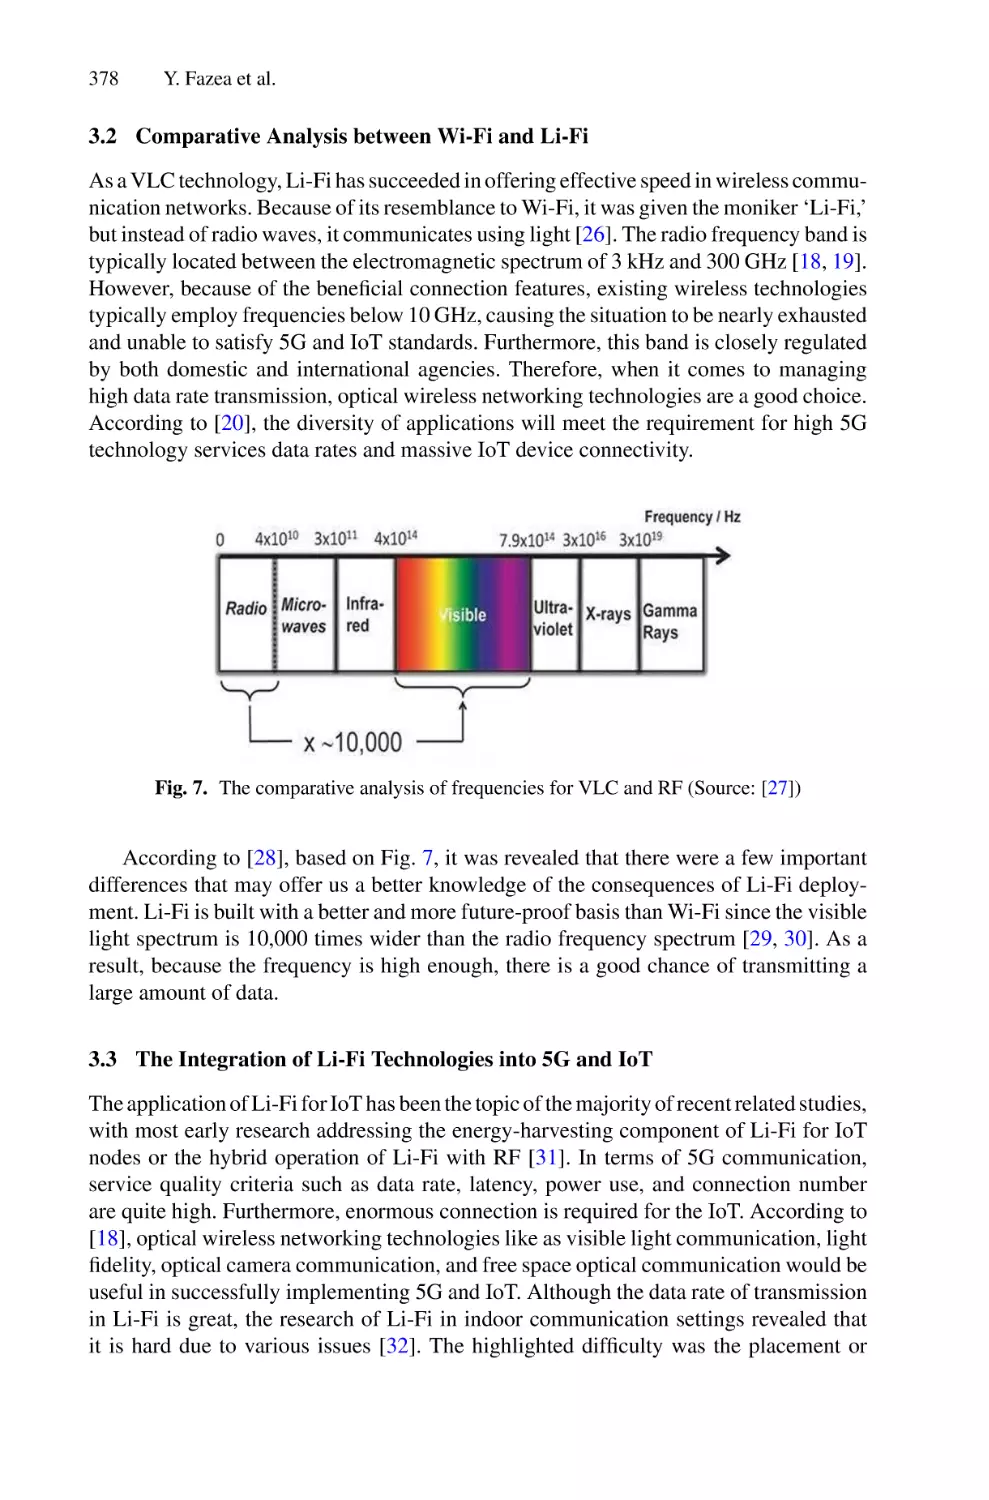 3.2 Comparative Analysis between Wi-Fi and Li-Fi
3.3 The Integration of Li-Fi Technologies into 5G and IoT